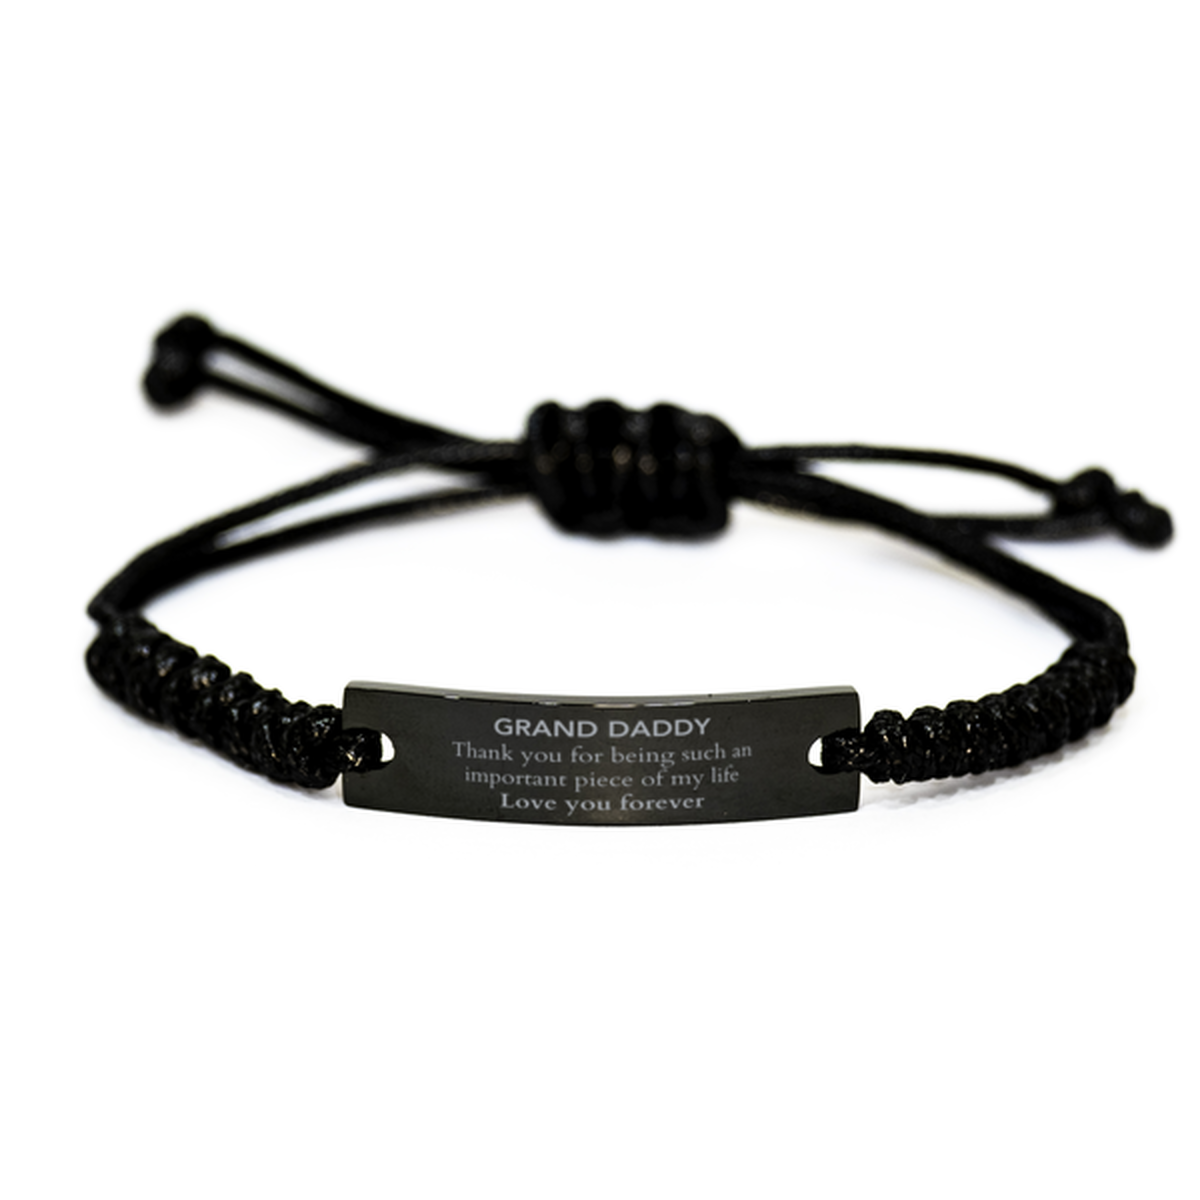 Appropriate Grand Daddy Black Rope Bracelet Epic Birthday Gifts for Grand Daddy Thank you for being such an important piece of my life Grand Daddy Christmas Mothers Fathers Day